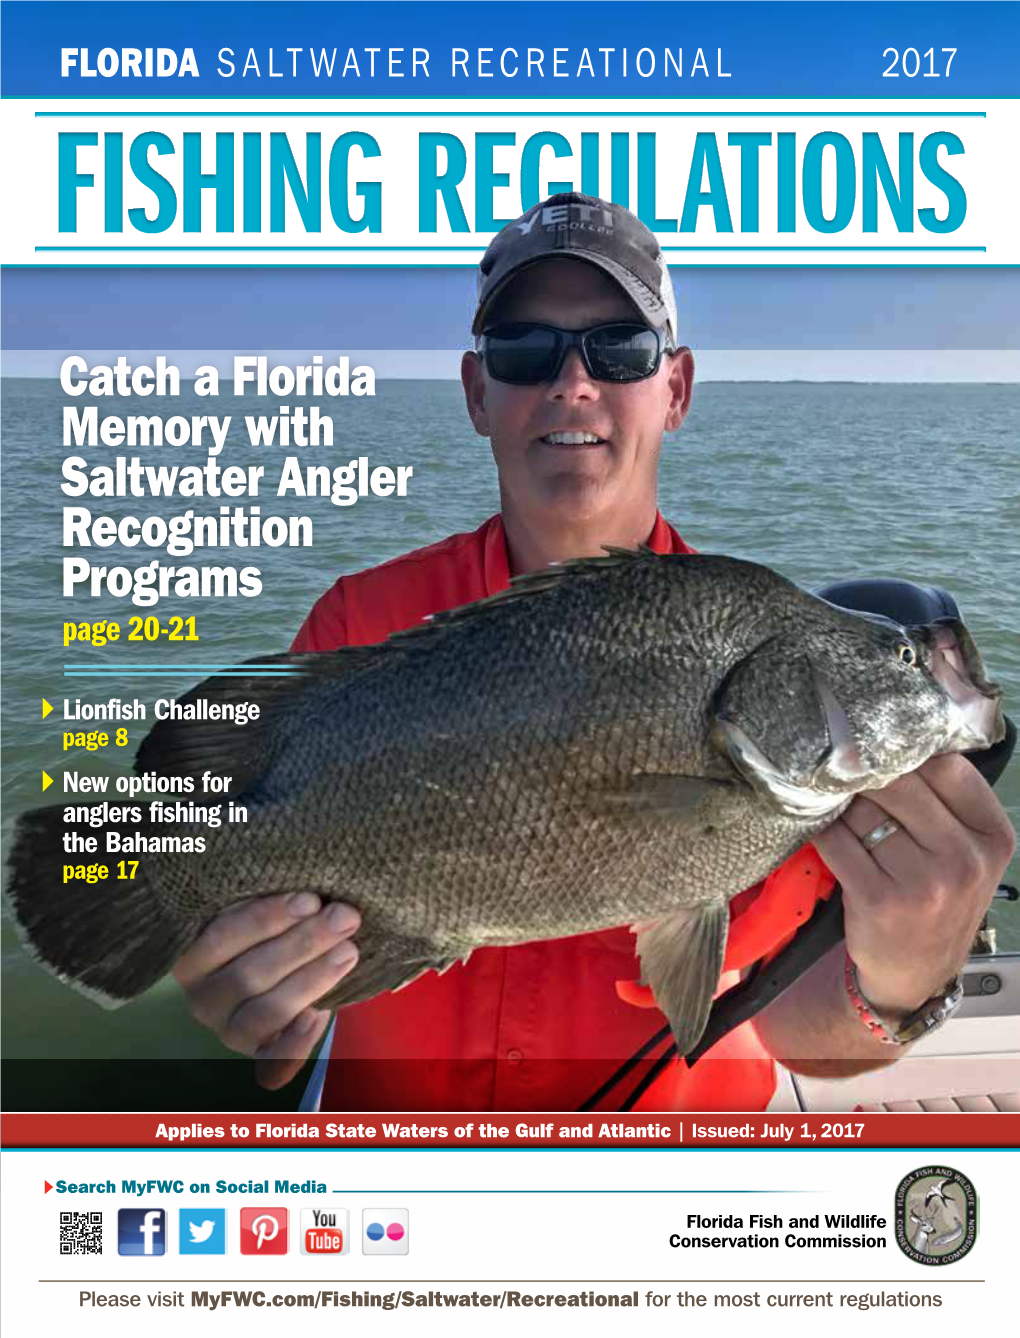 Catch a Florida Memory with Saltwater Angler Recognition Programs Page 20-21